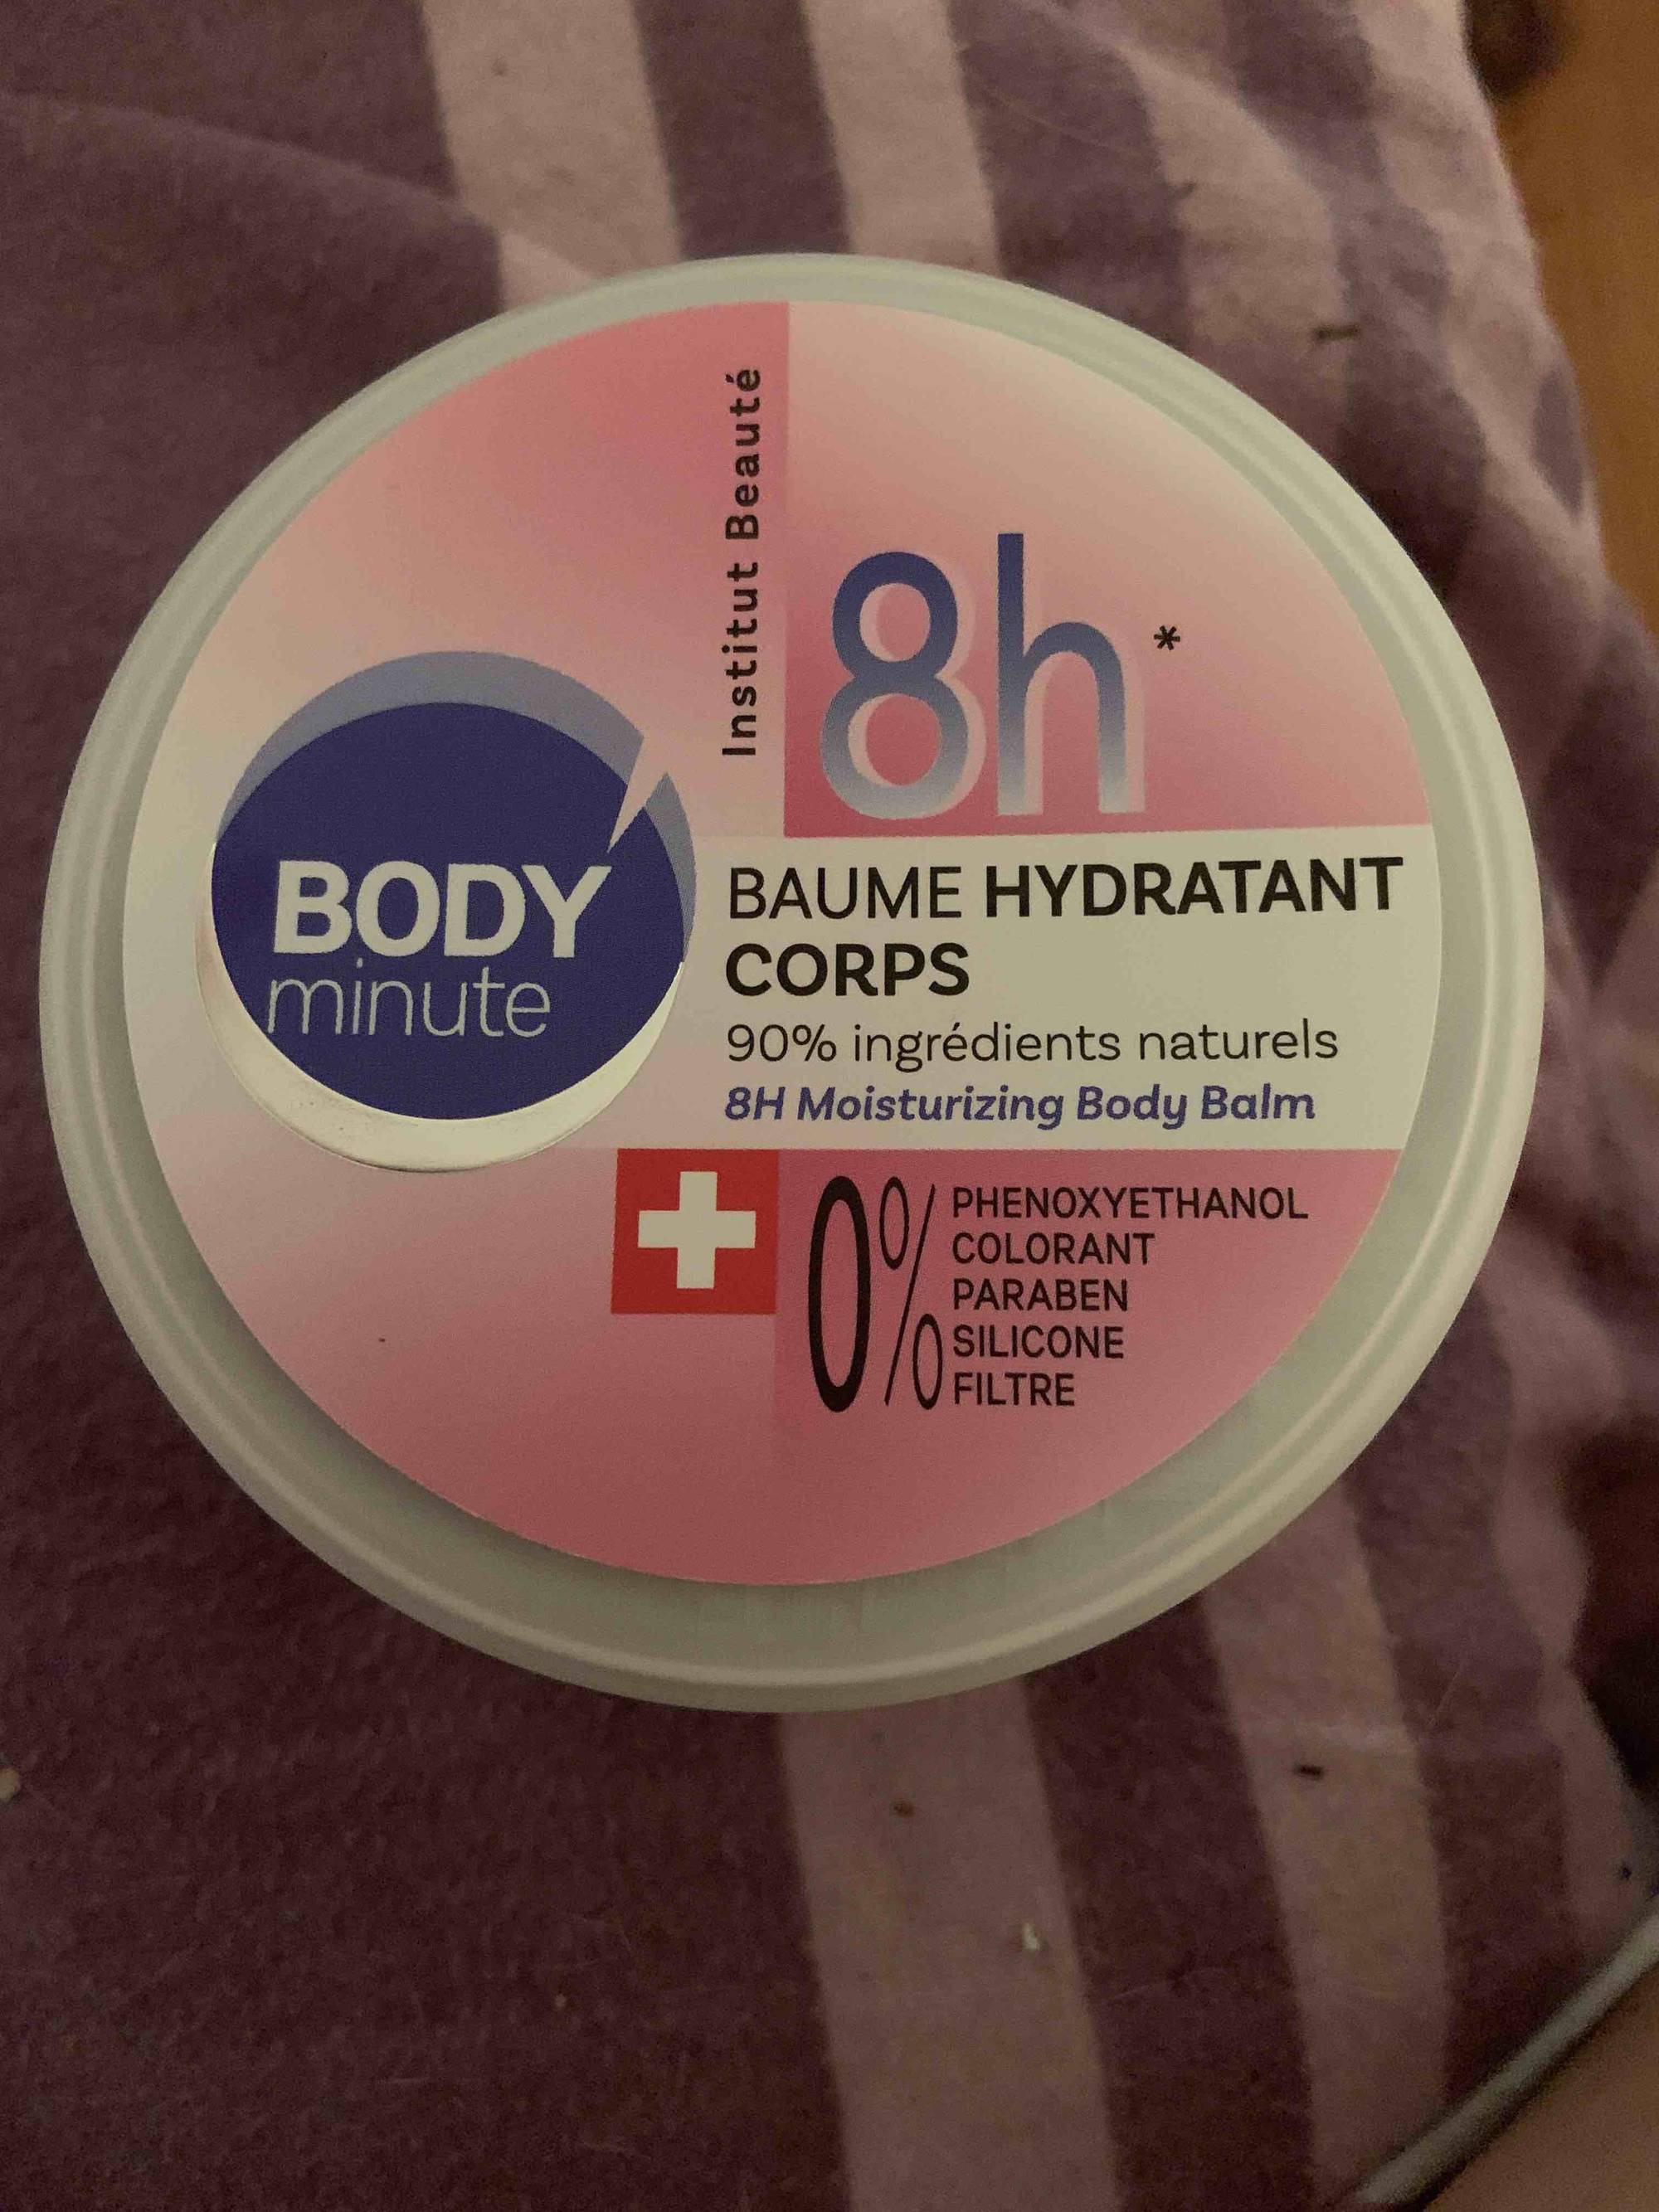 BODY'MINUTE - Baume hydratant corps 8h